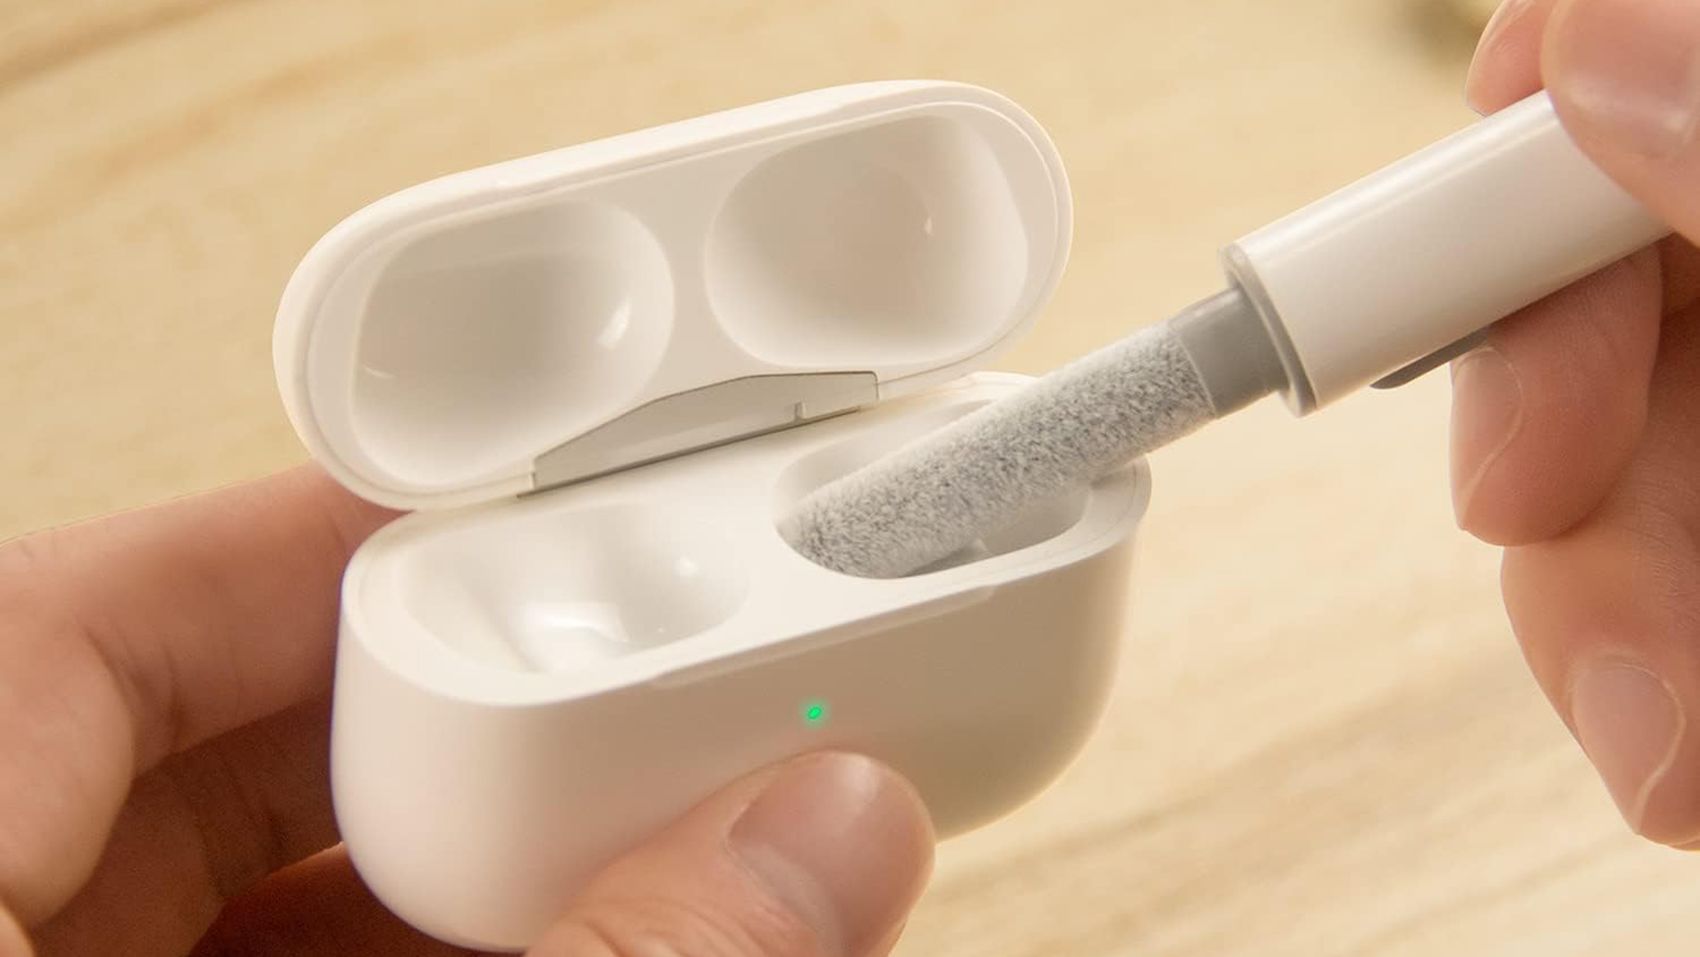 How to Clean AirPods, Earbuds, and Headphones